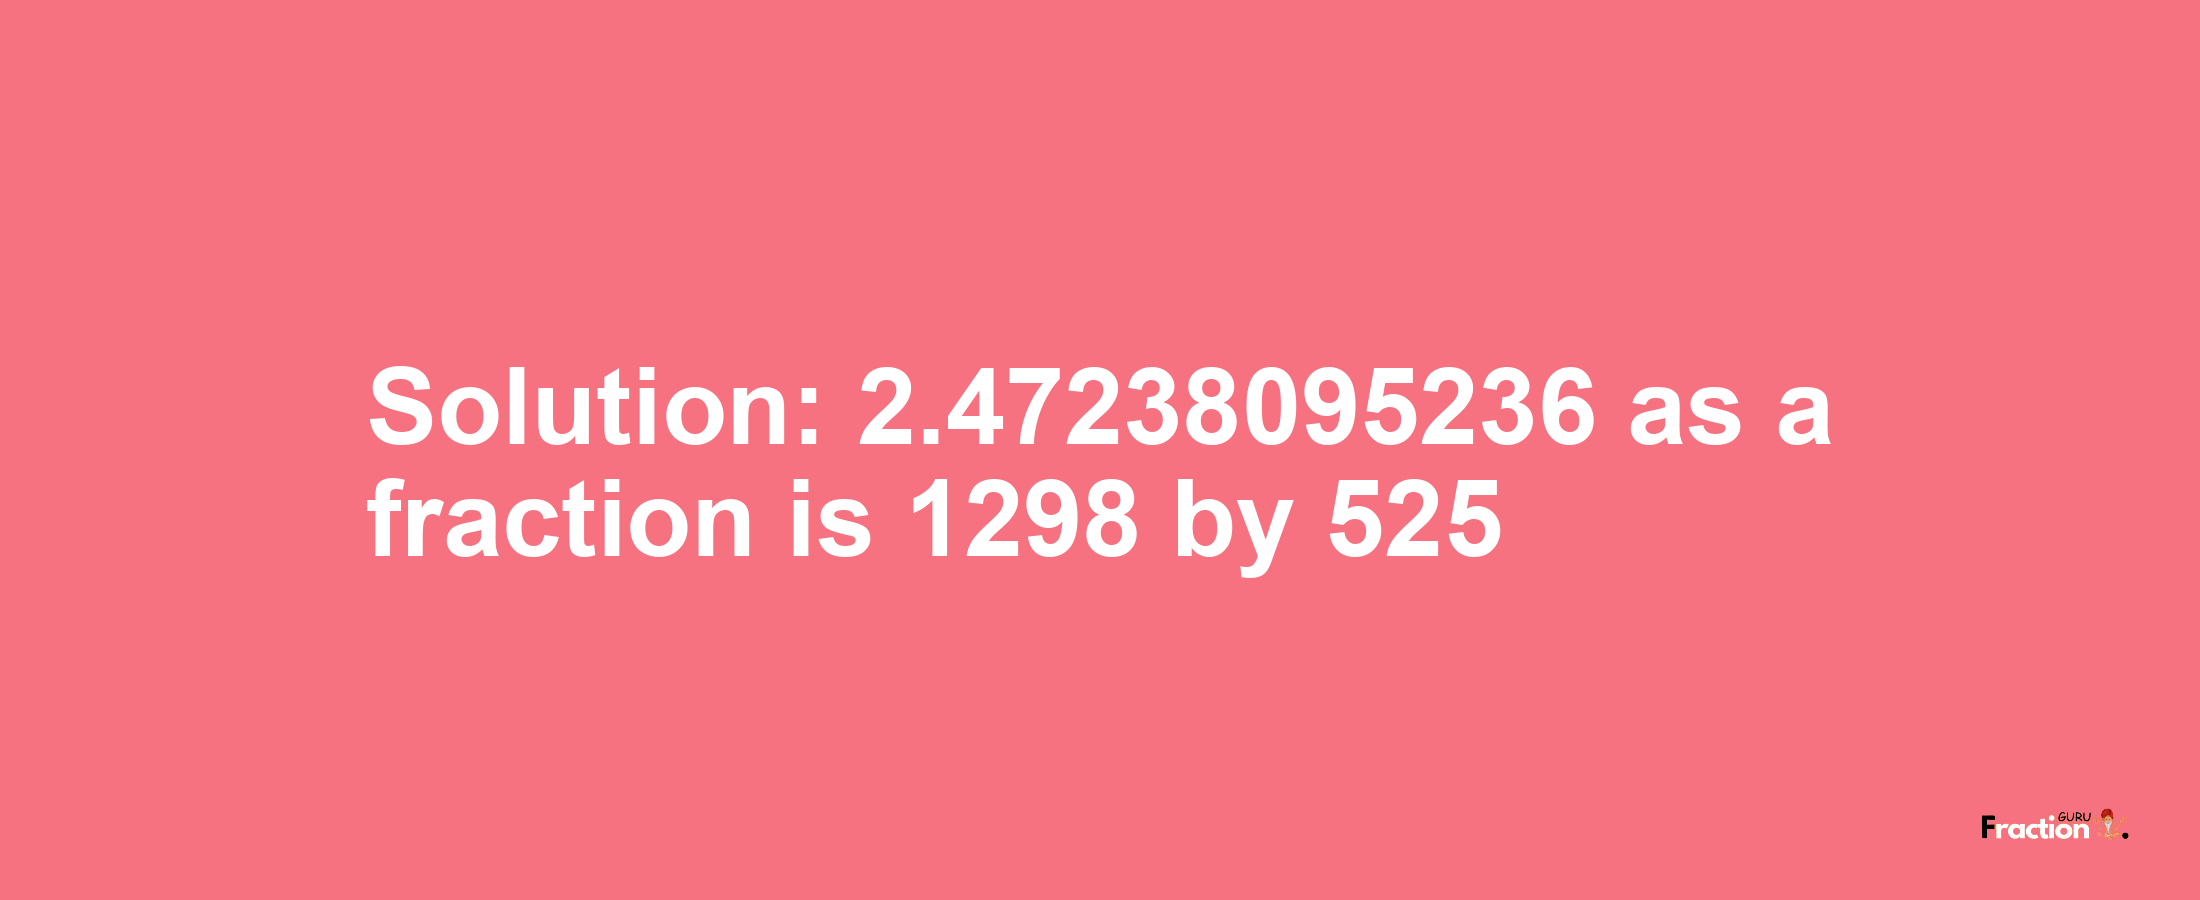 Solution:2.47238095236 as a fraction is 1298/525